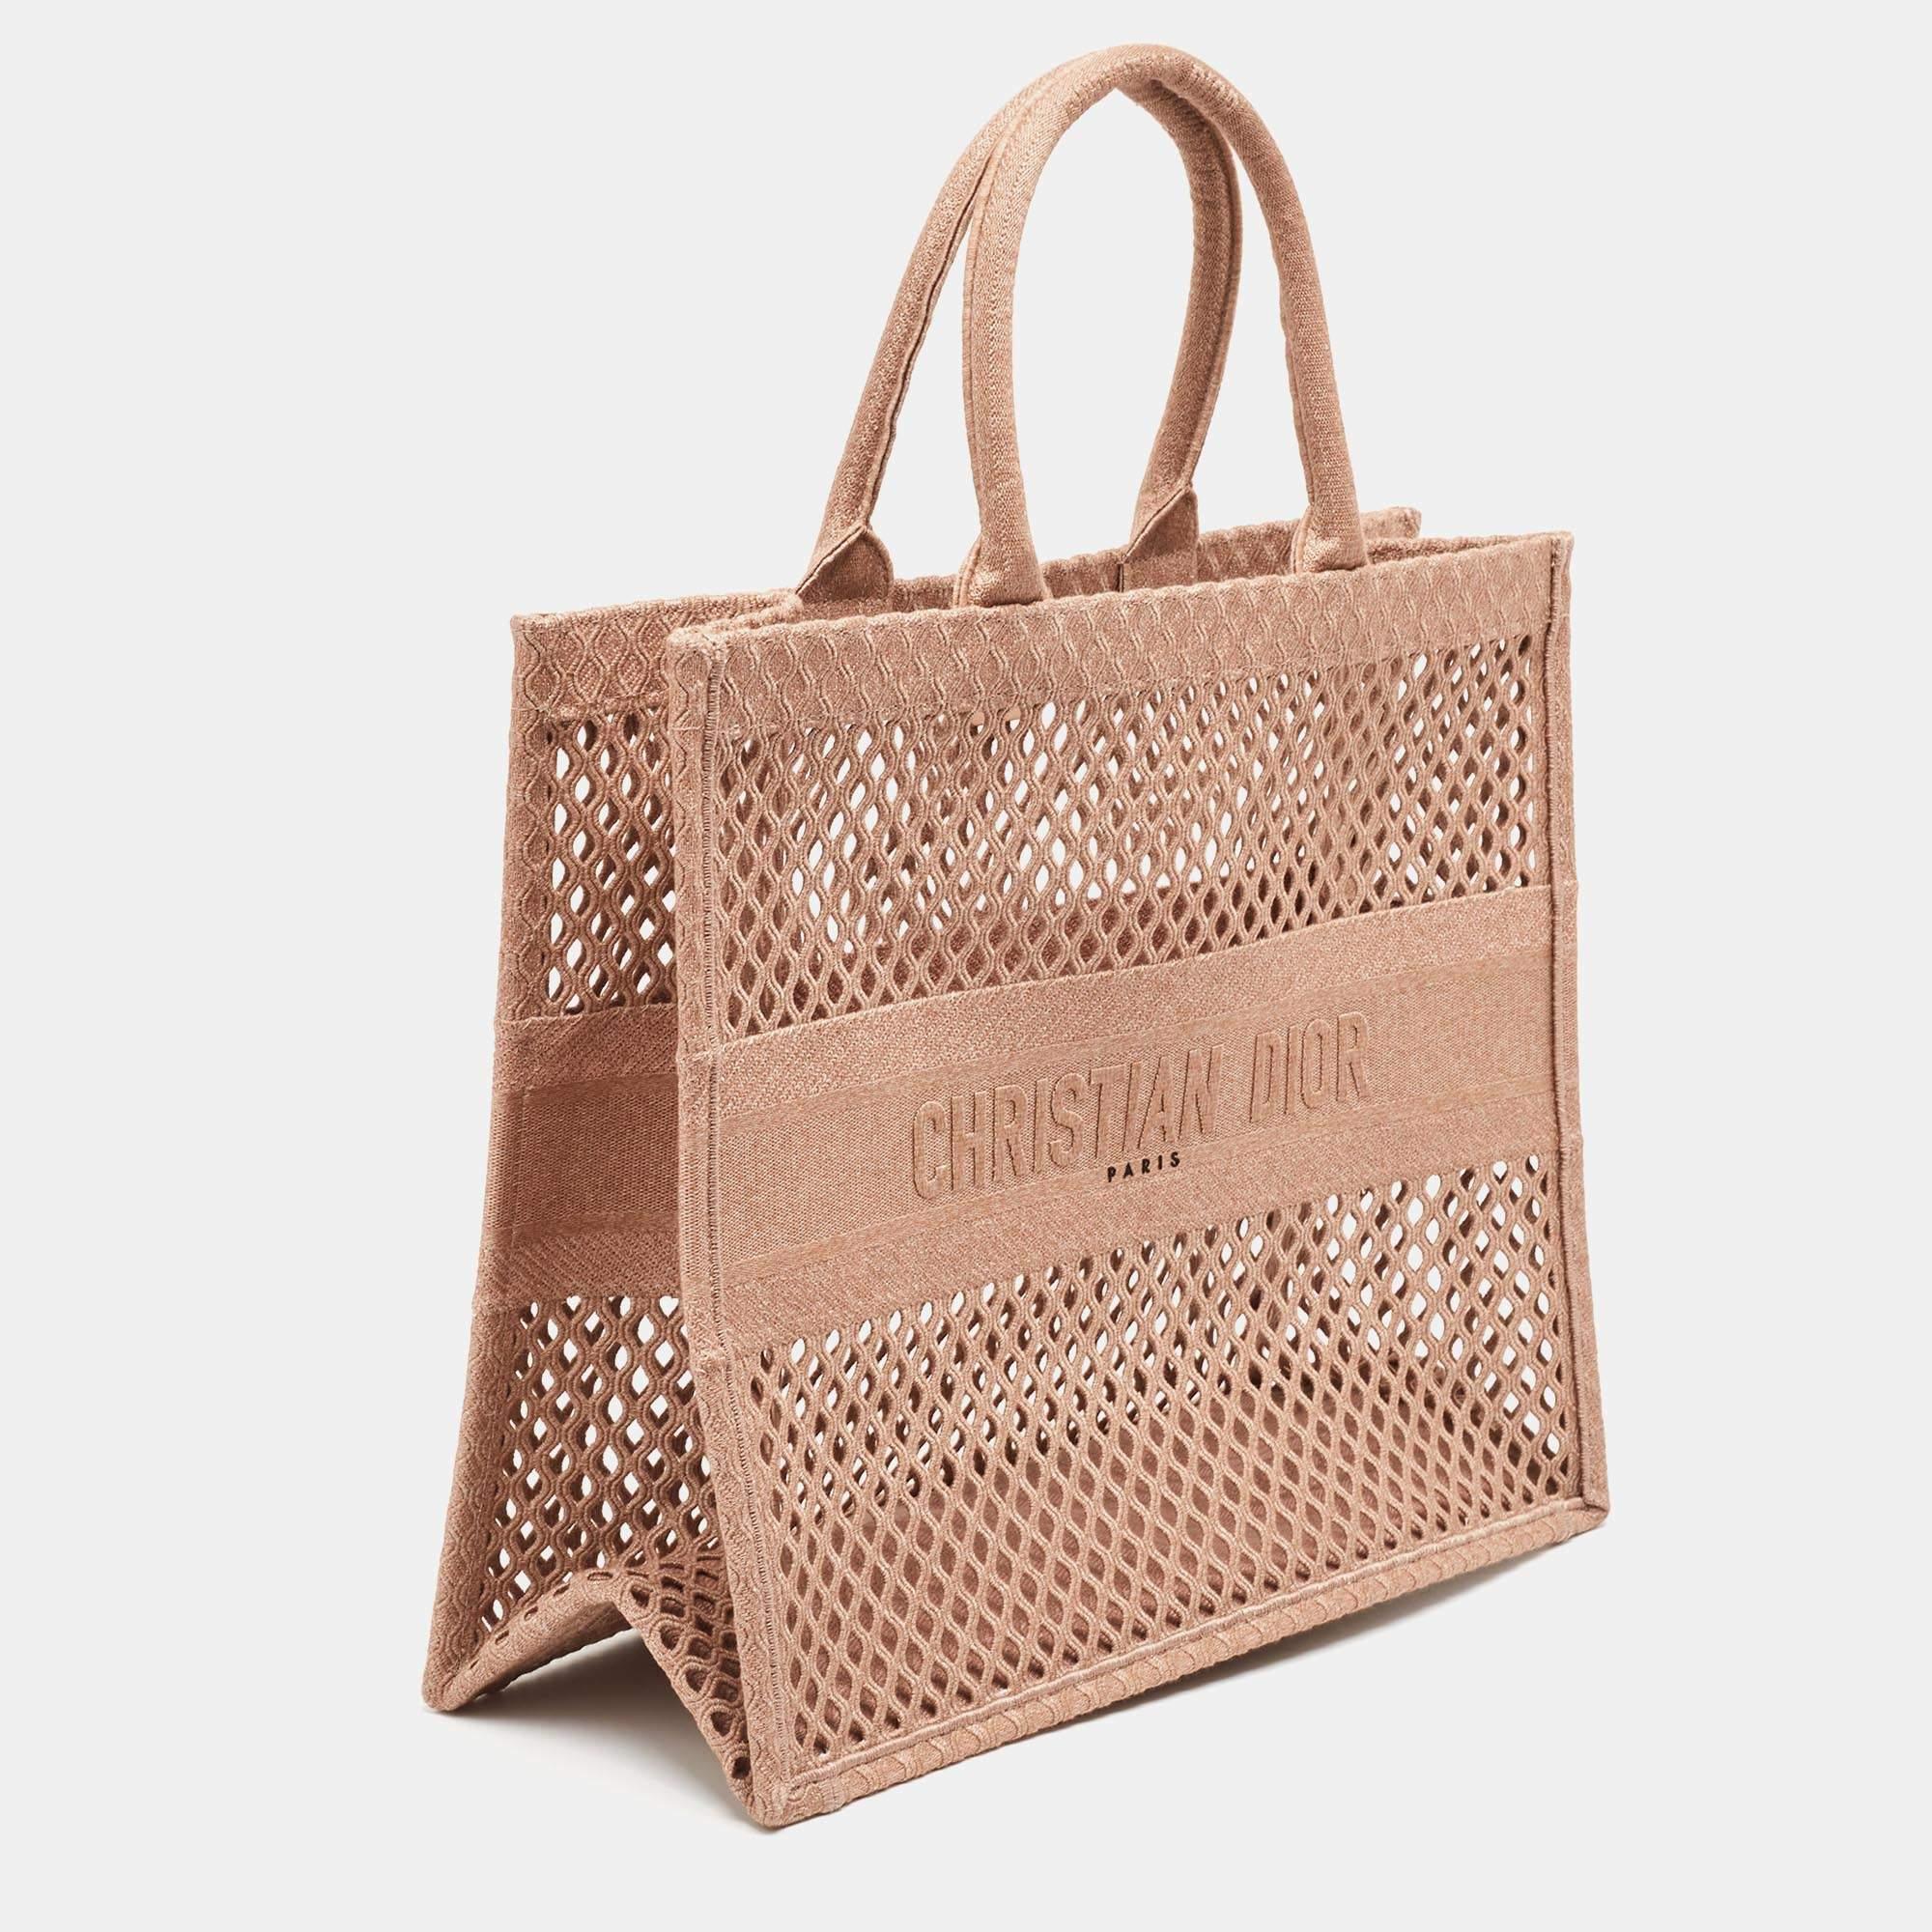 Carry everything you need in style thanks to this Dior Book tote. Crafted from the best materials, this is an accessory that promises enduring style and usage.

